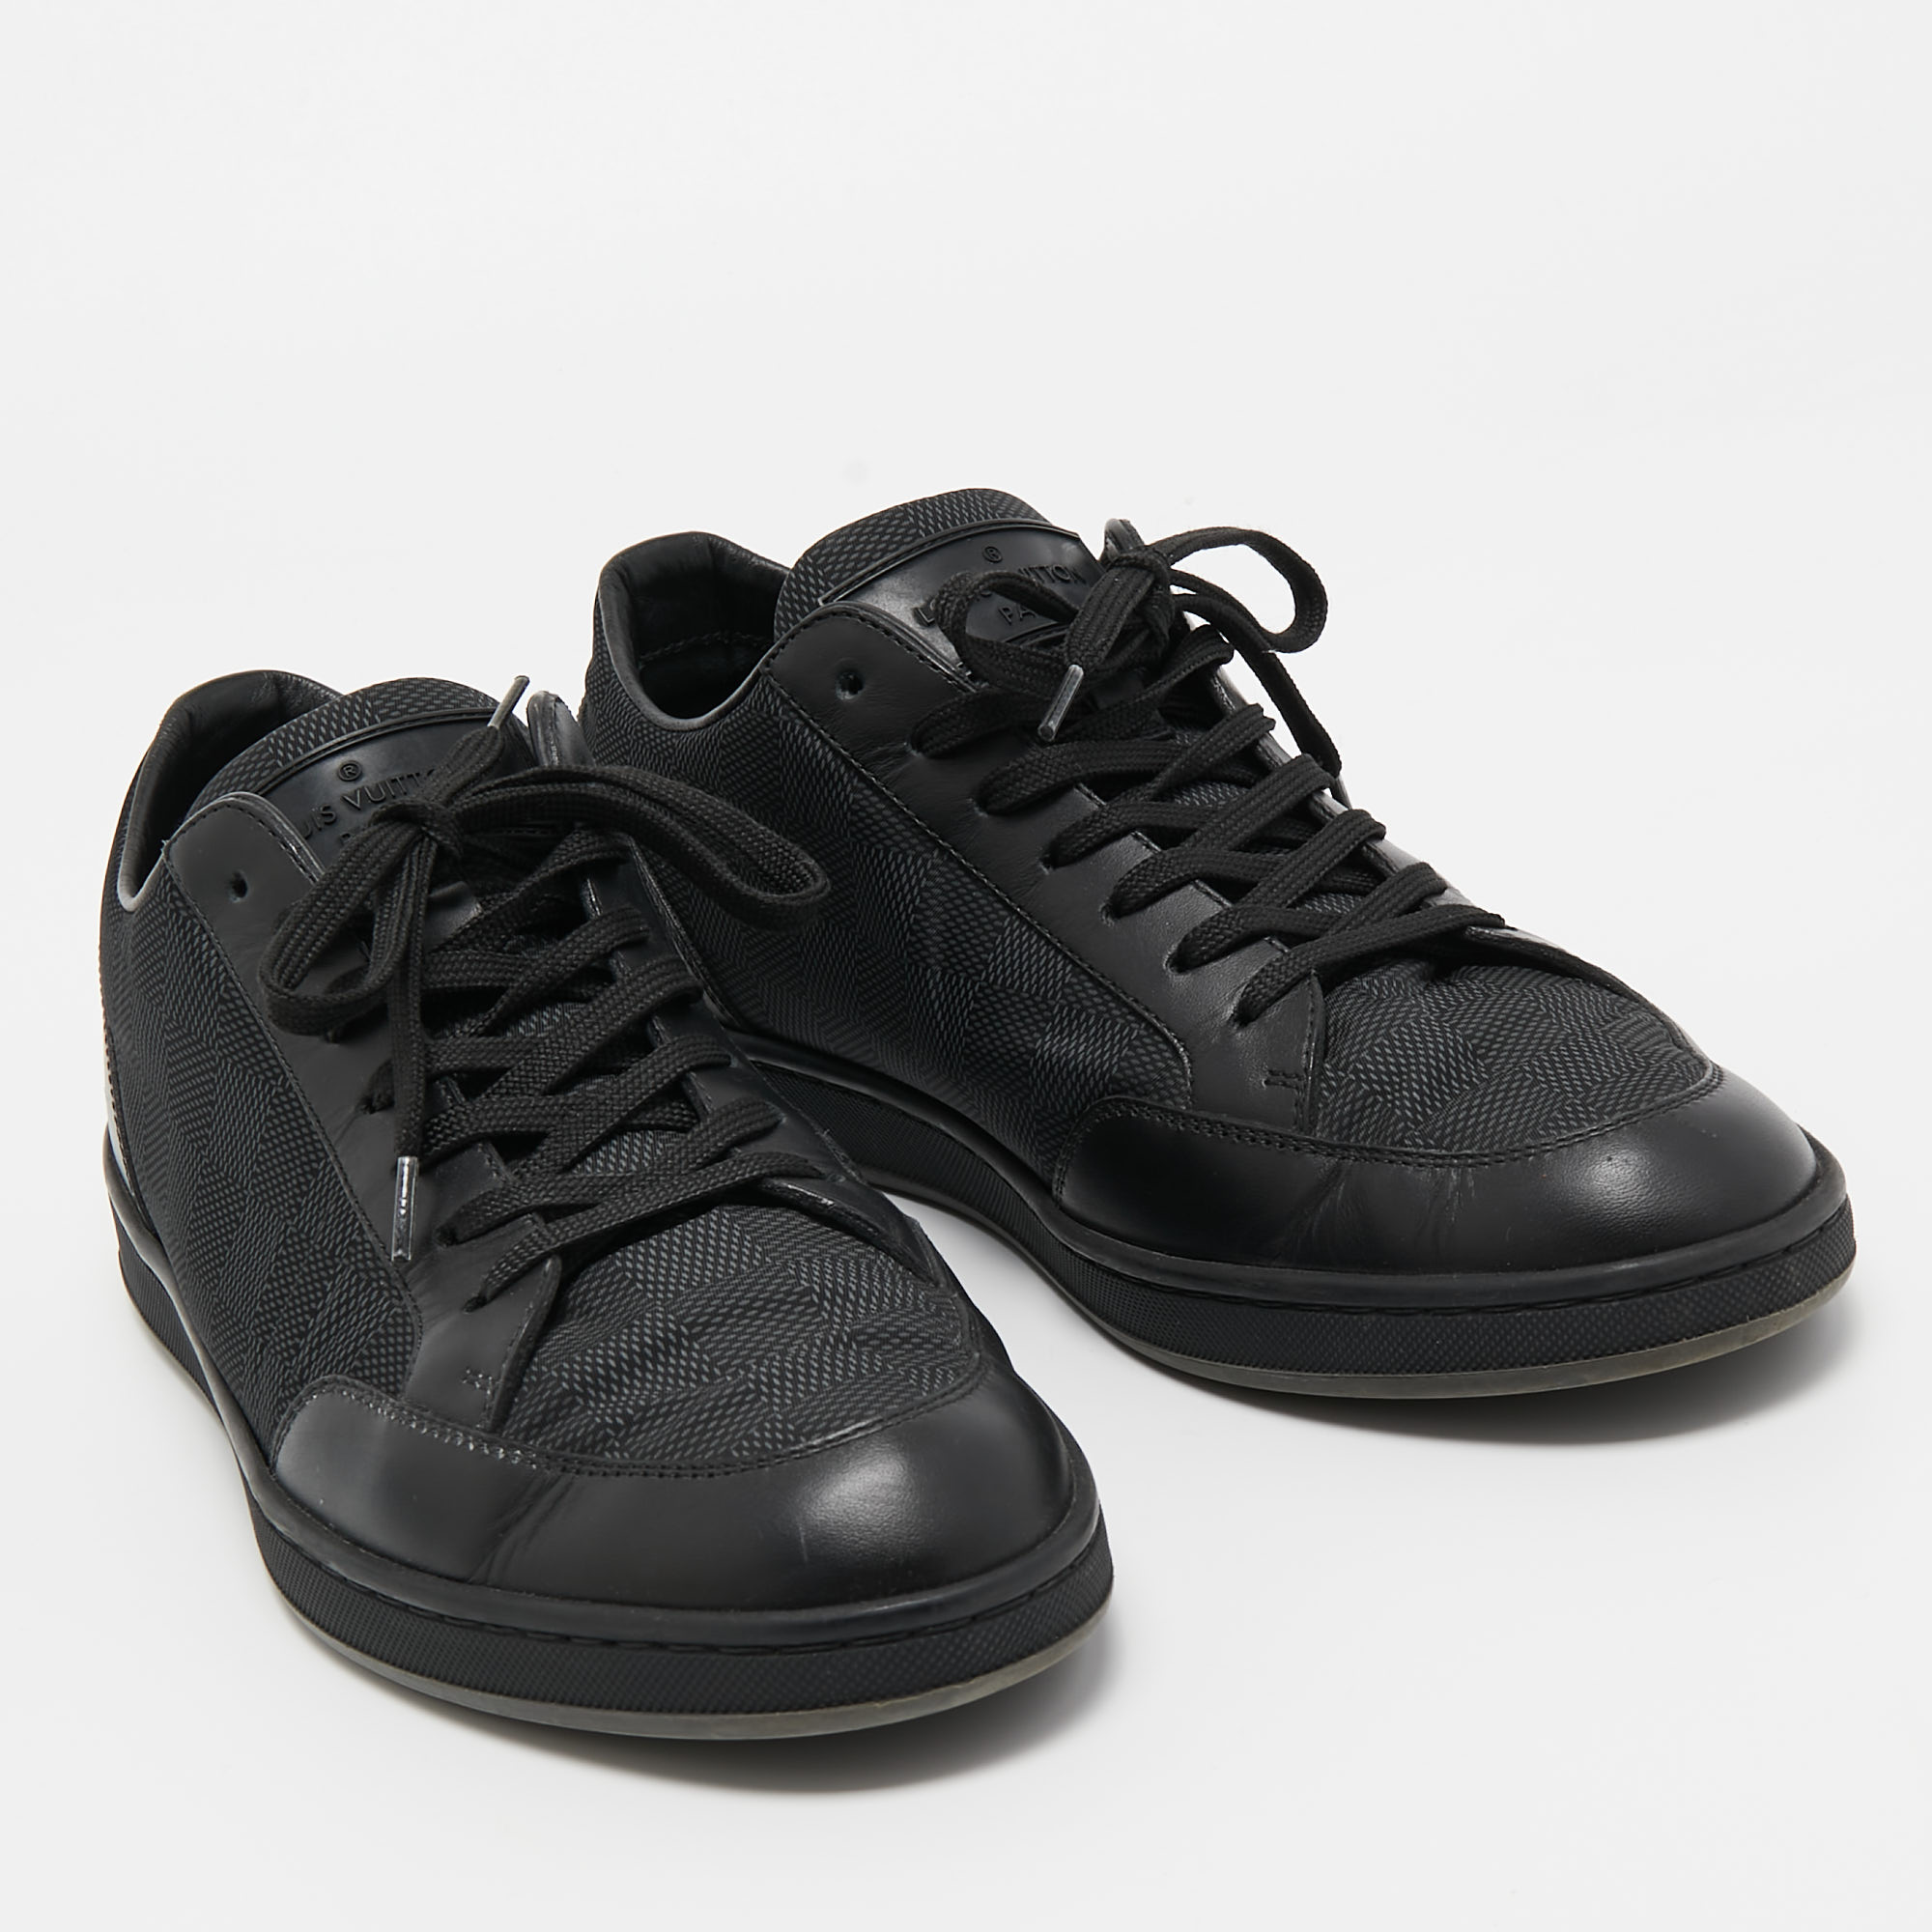 Louis Vuitton Black Leather And Nylon Low Top Sneakers Size 41